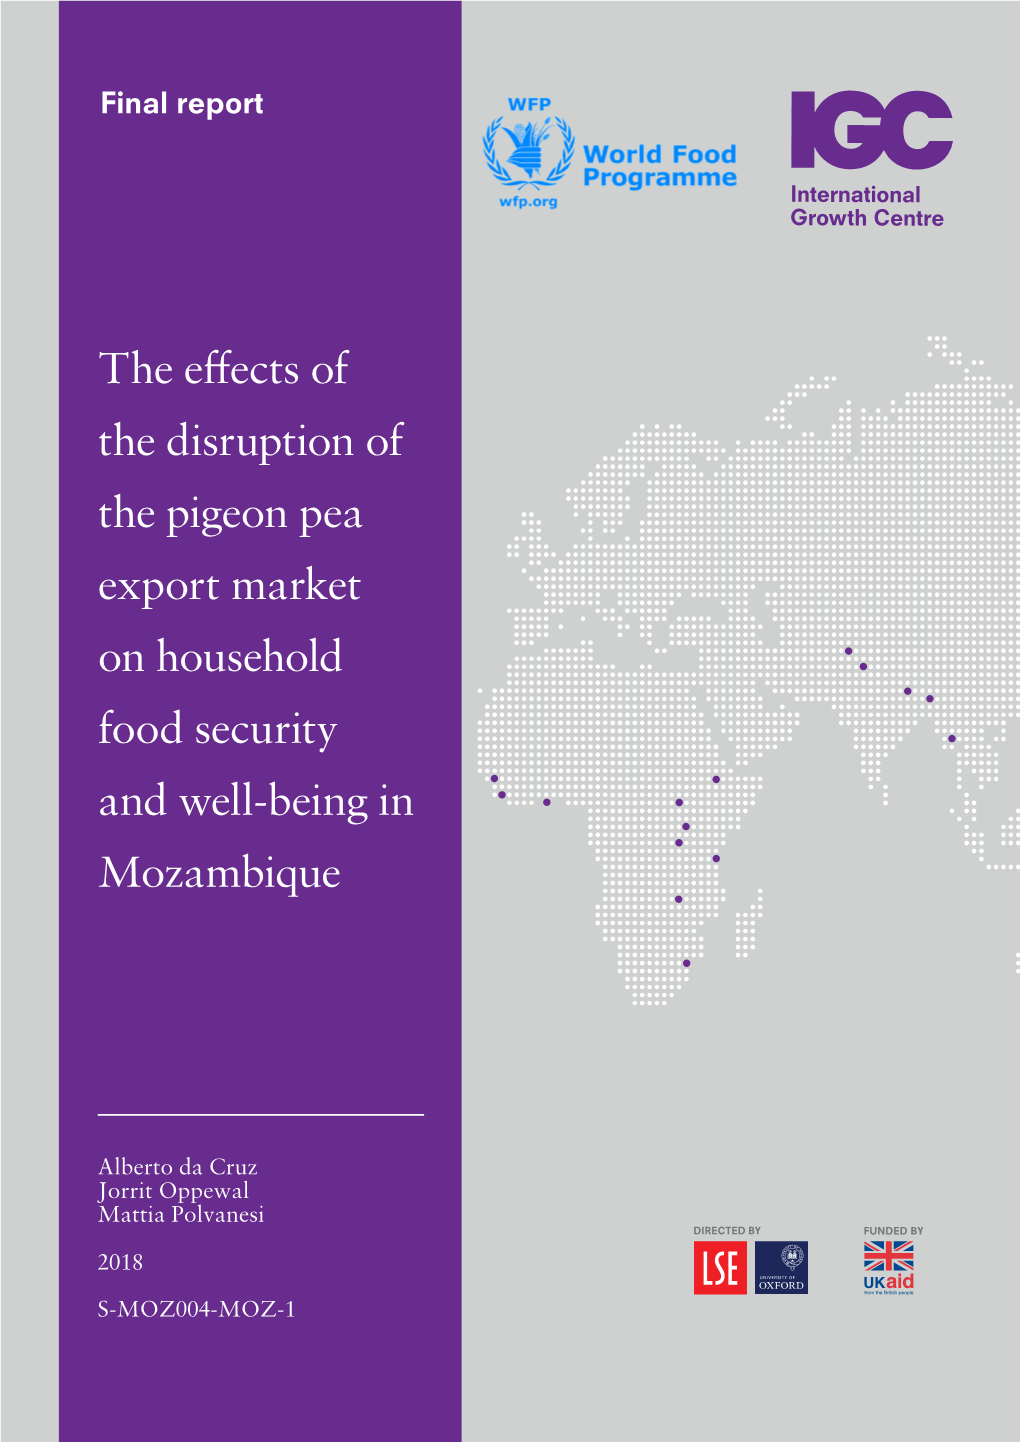 The Effects of the Disruption of the Pigeon Pea Export Market on Household Food Security and Well-Being in Mozambique